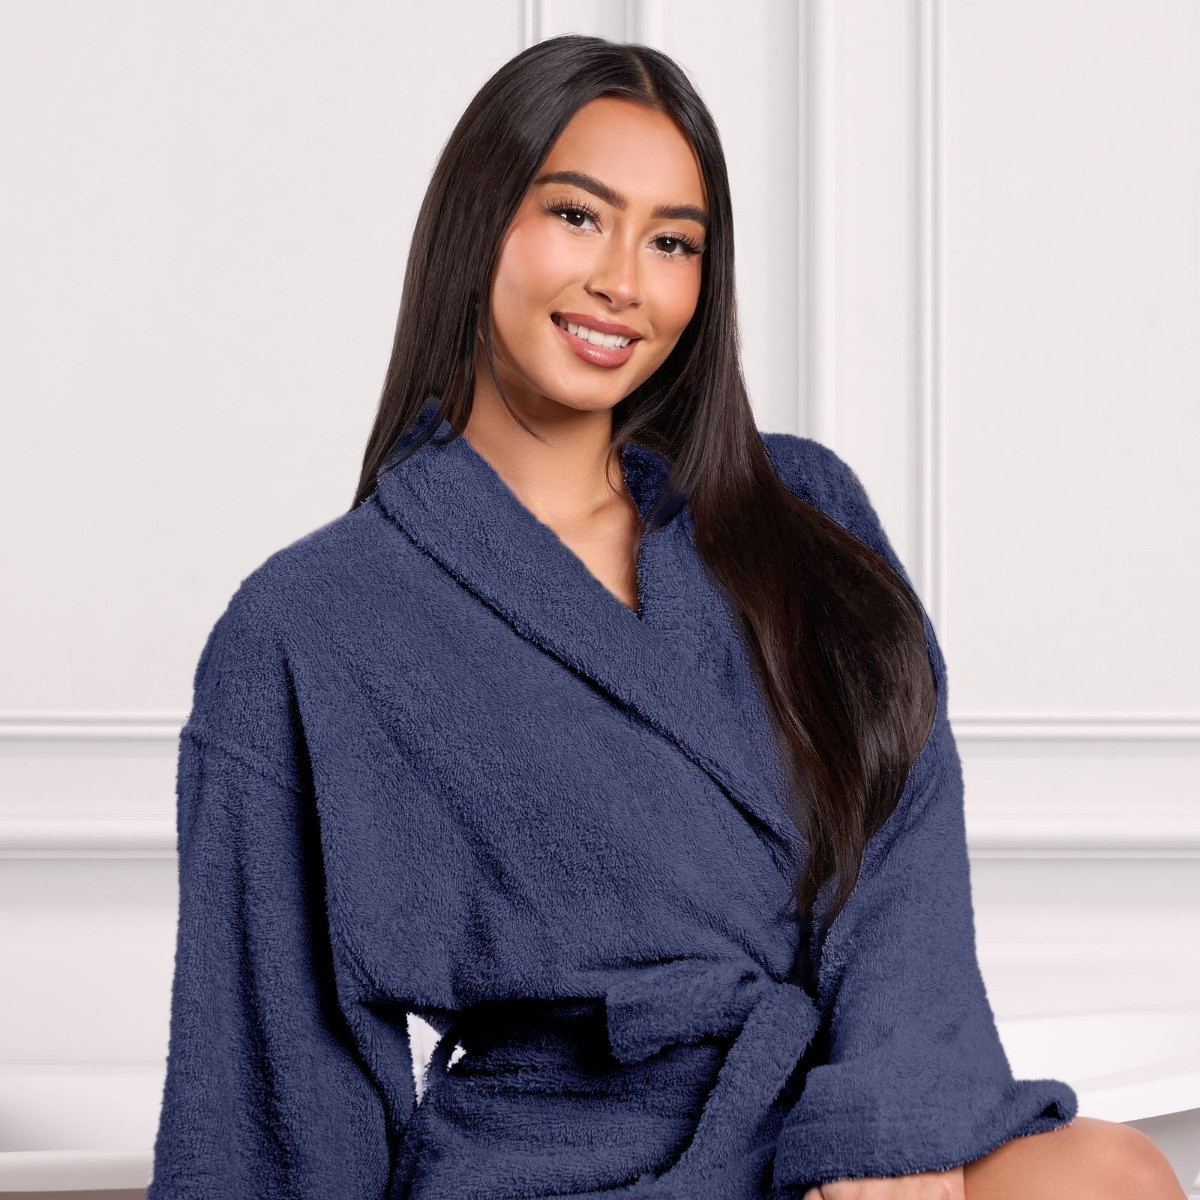 Brentfords 100% Cotton Towelling Dressing Gown, Adults - Navy Blue>